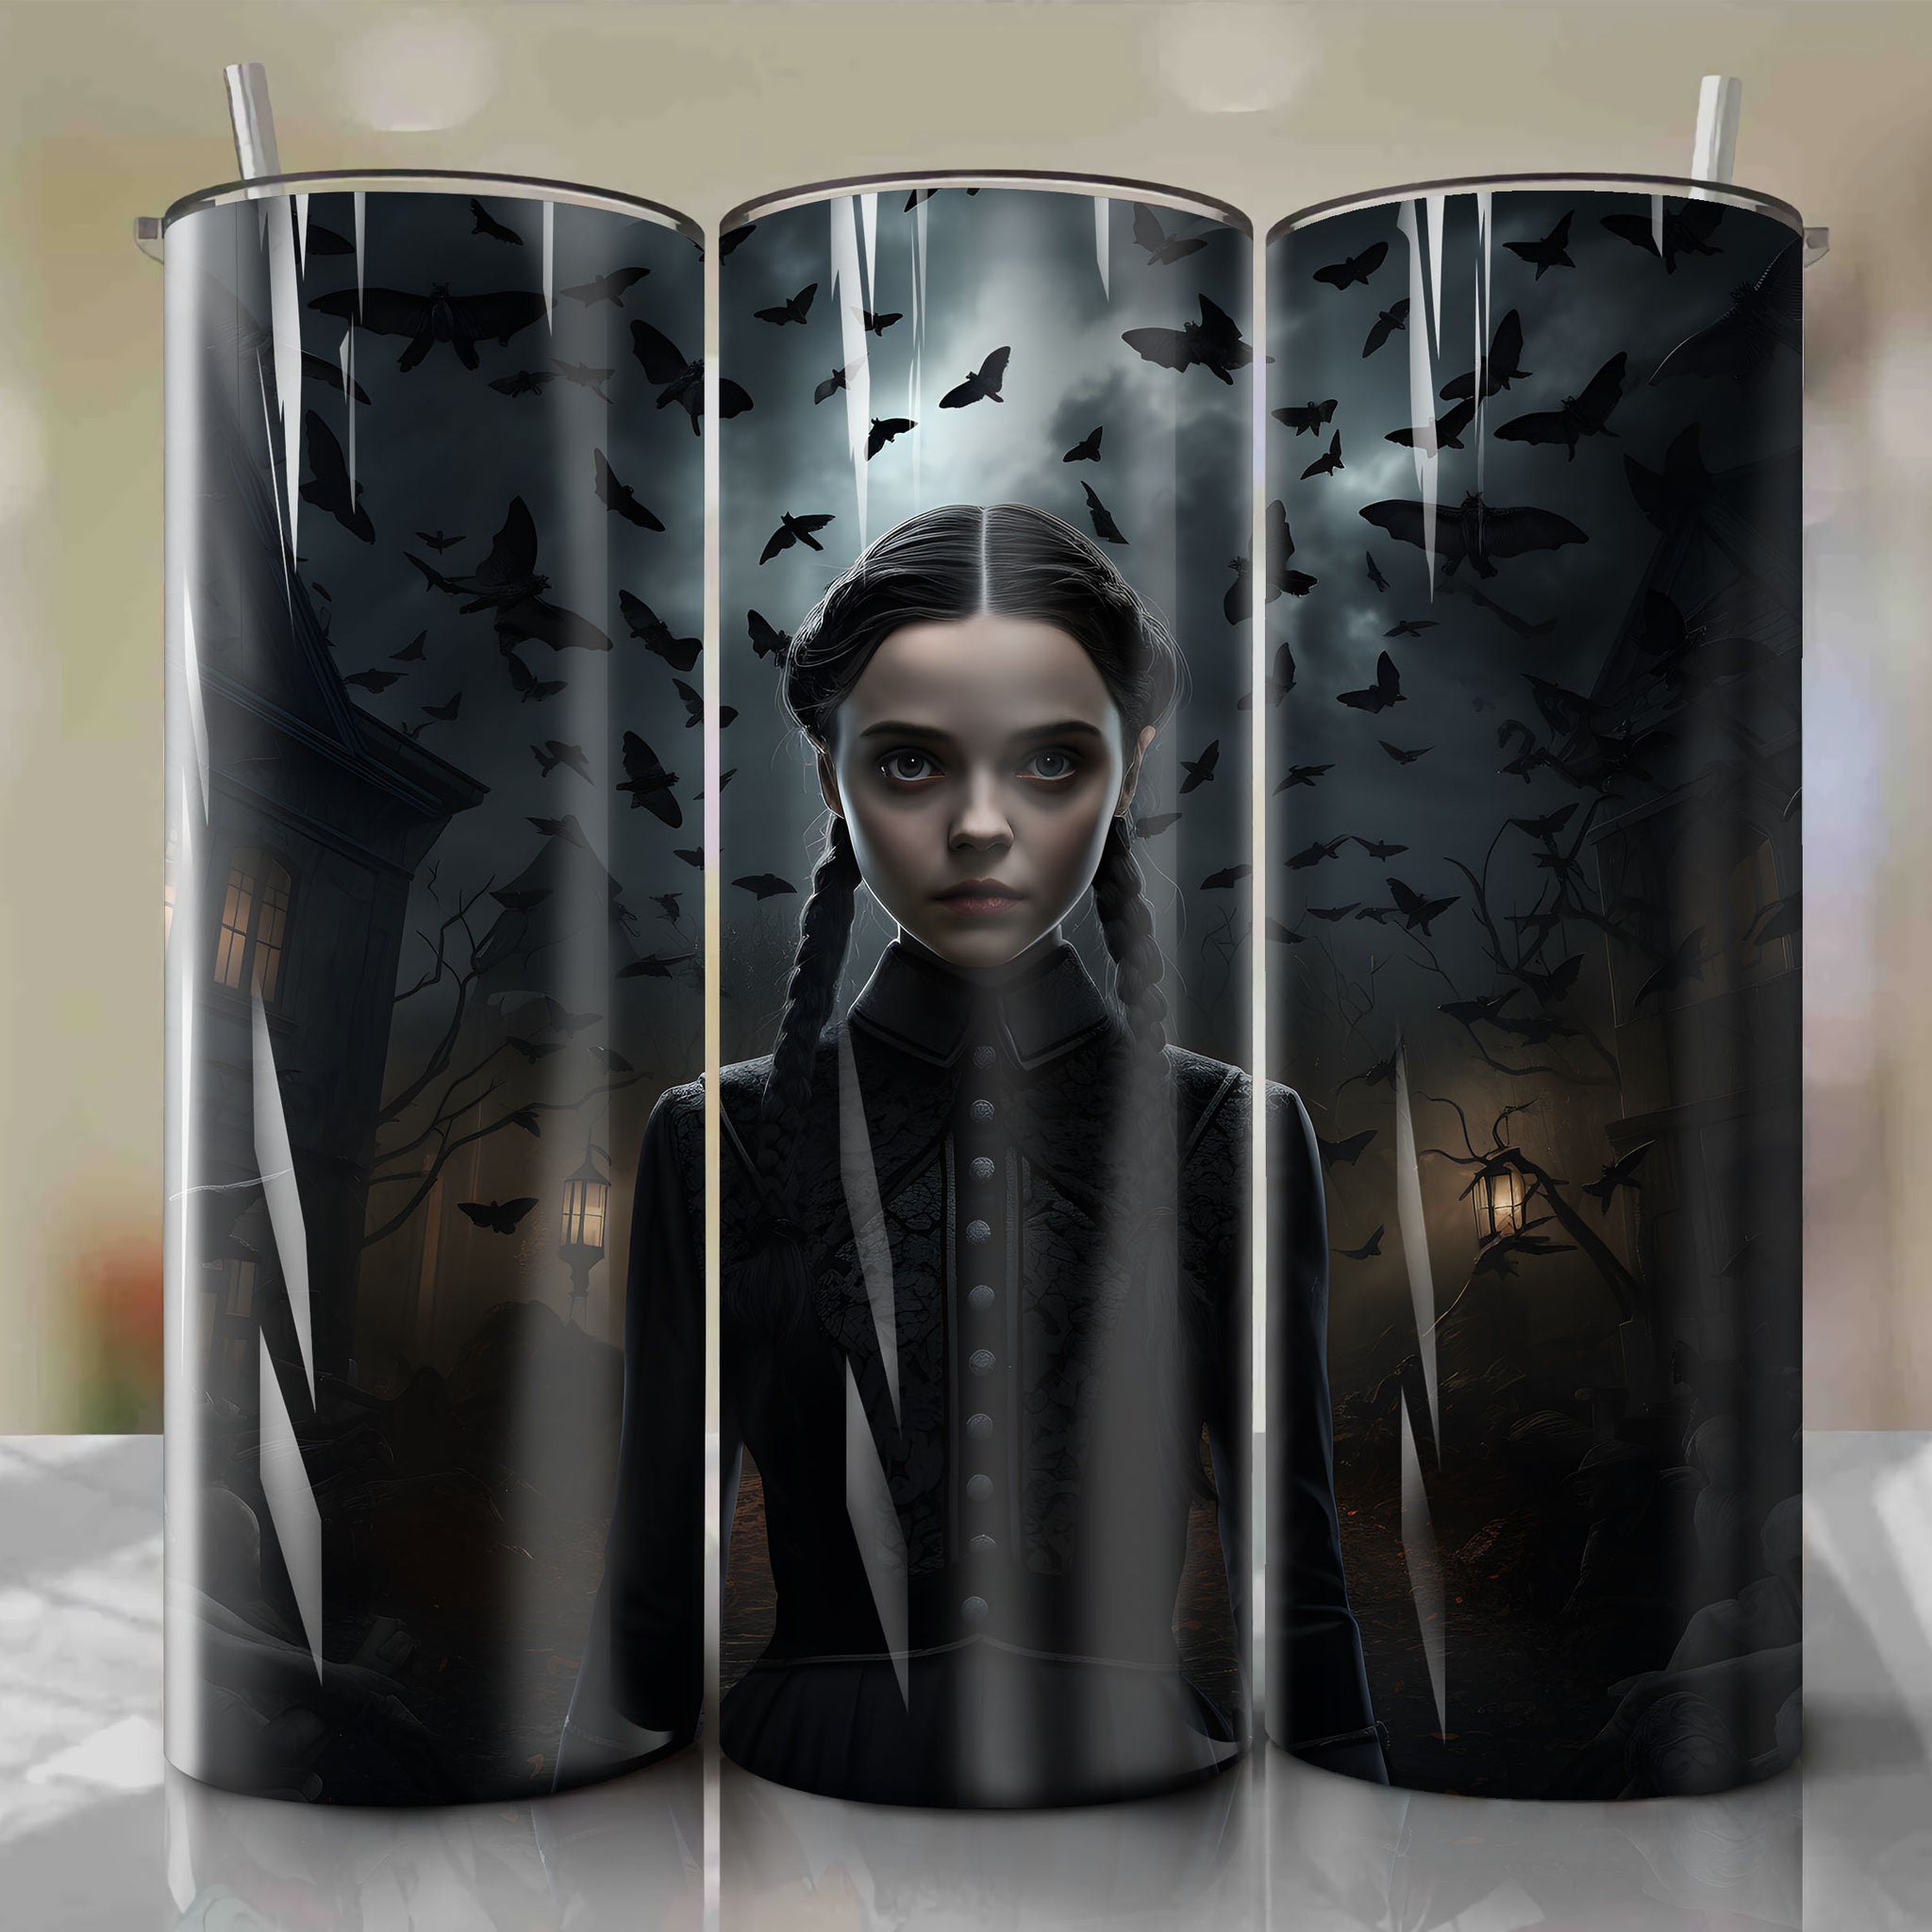 Creepy 3D Vampire Tumbler Wrap: Wednesday Addams Illustration with Bats and Abandoned Mansion Background